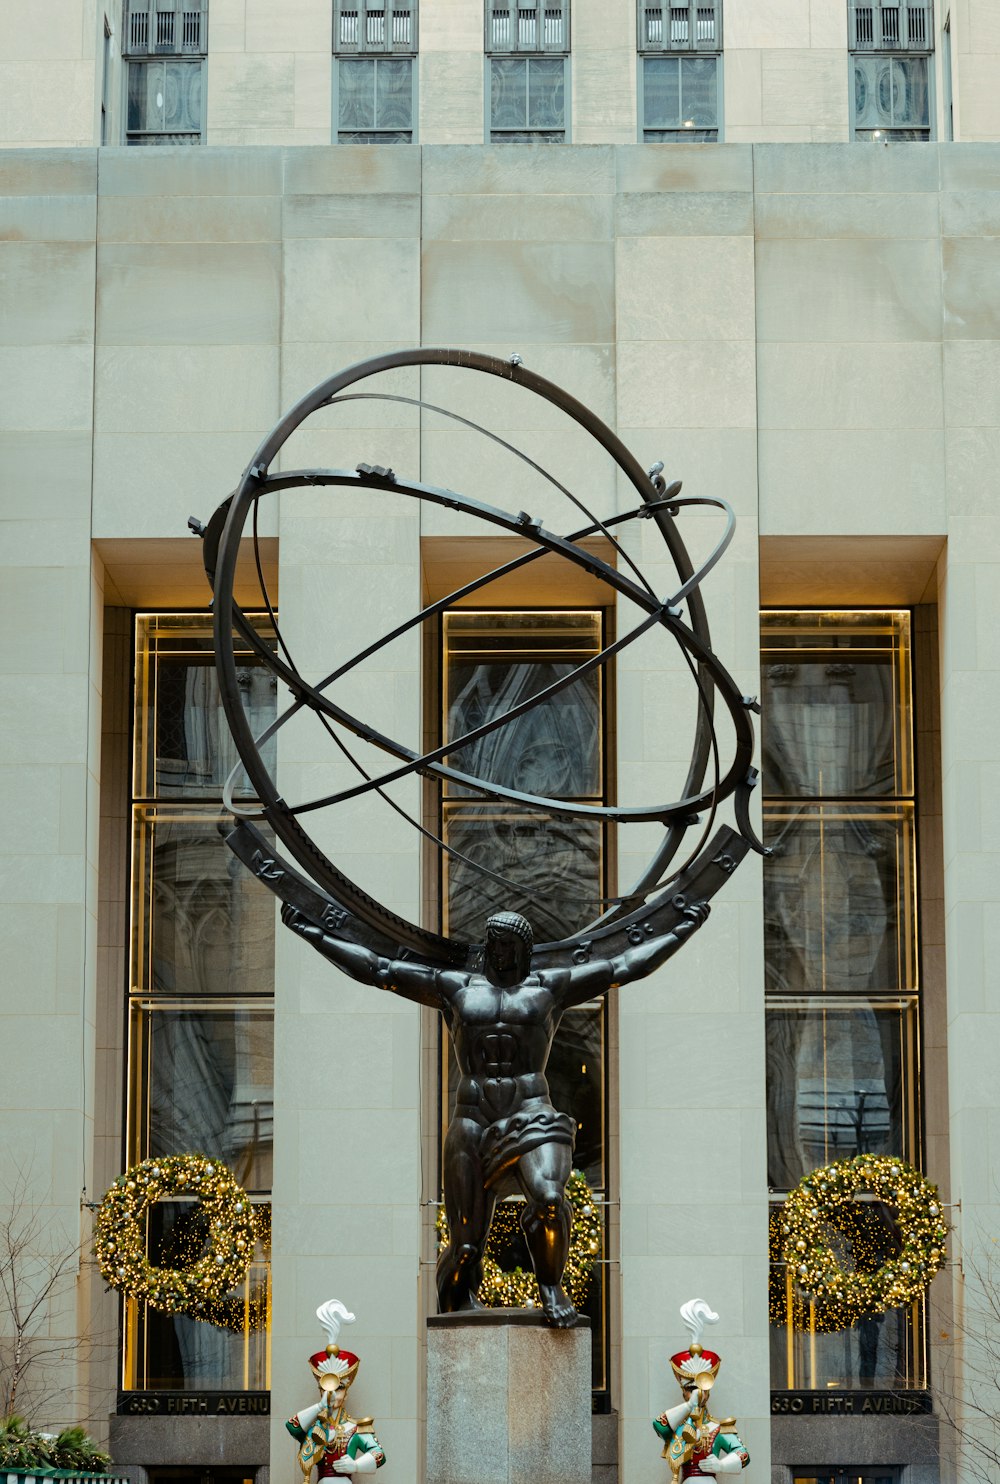 a statue in front of a building with windows